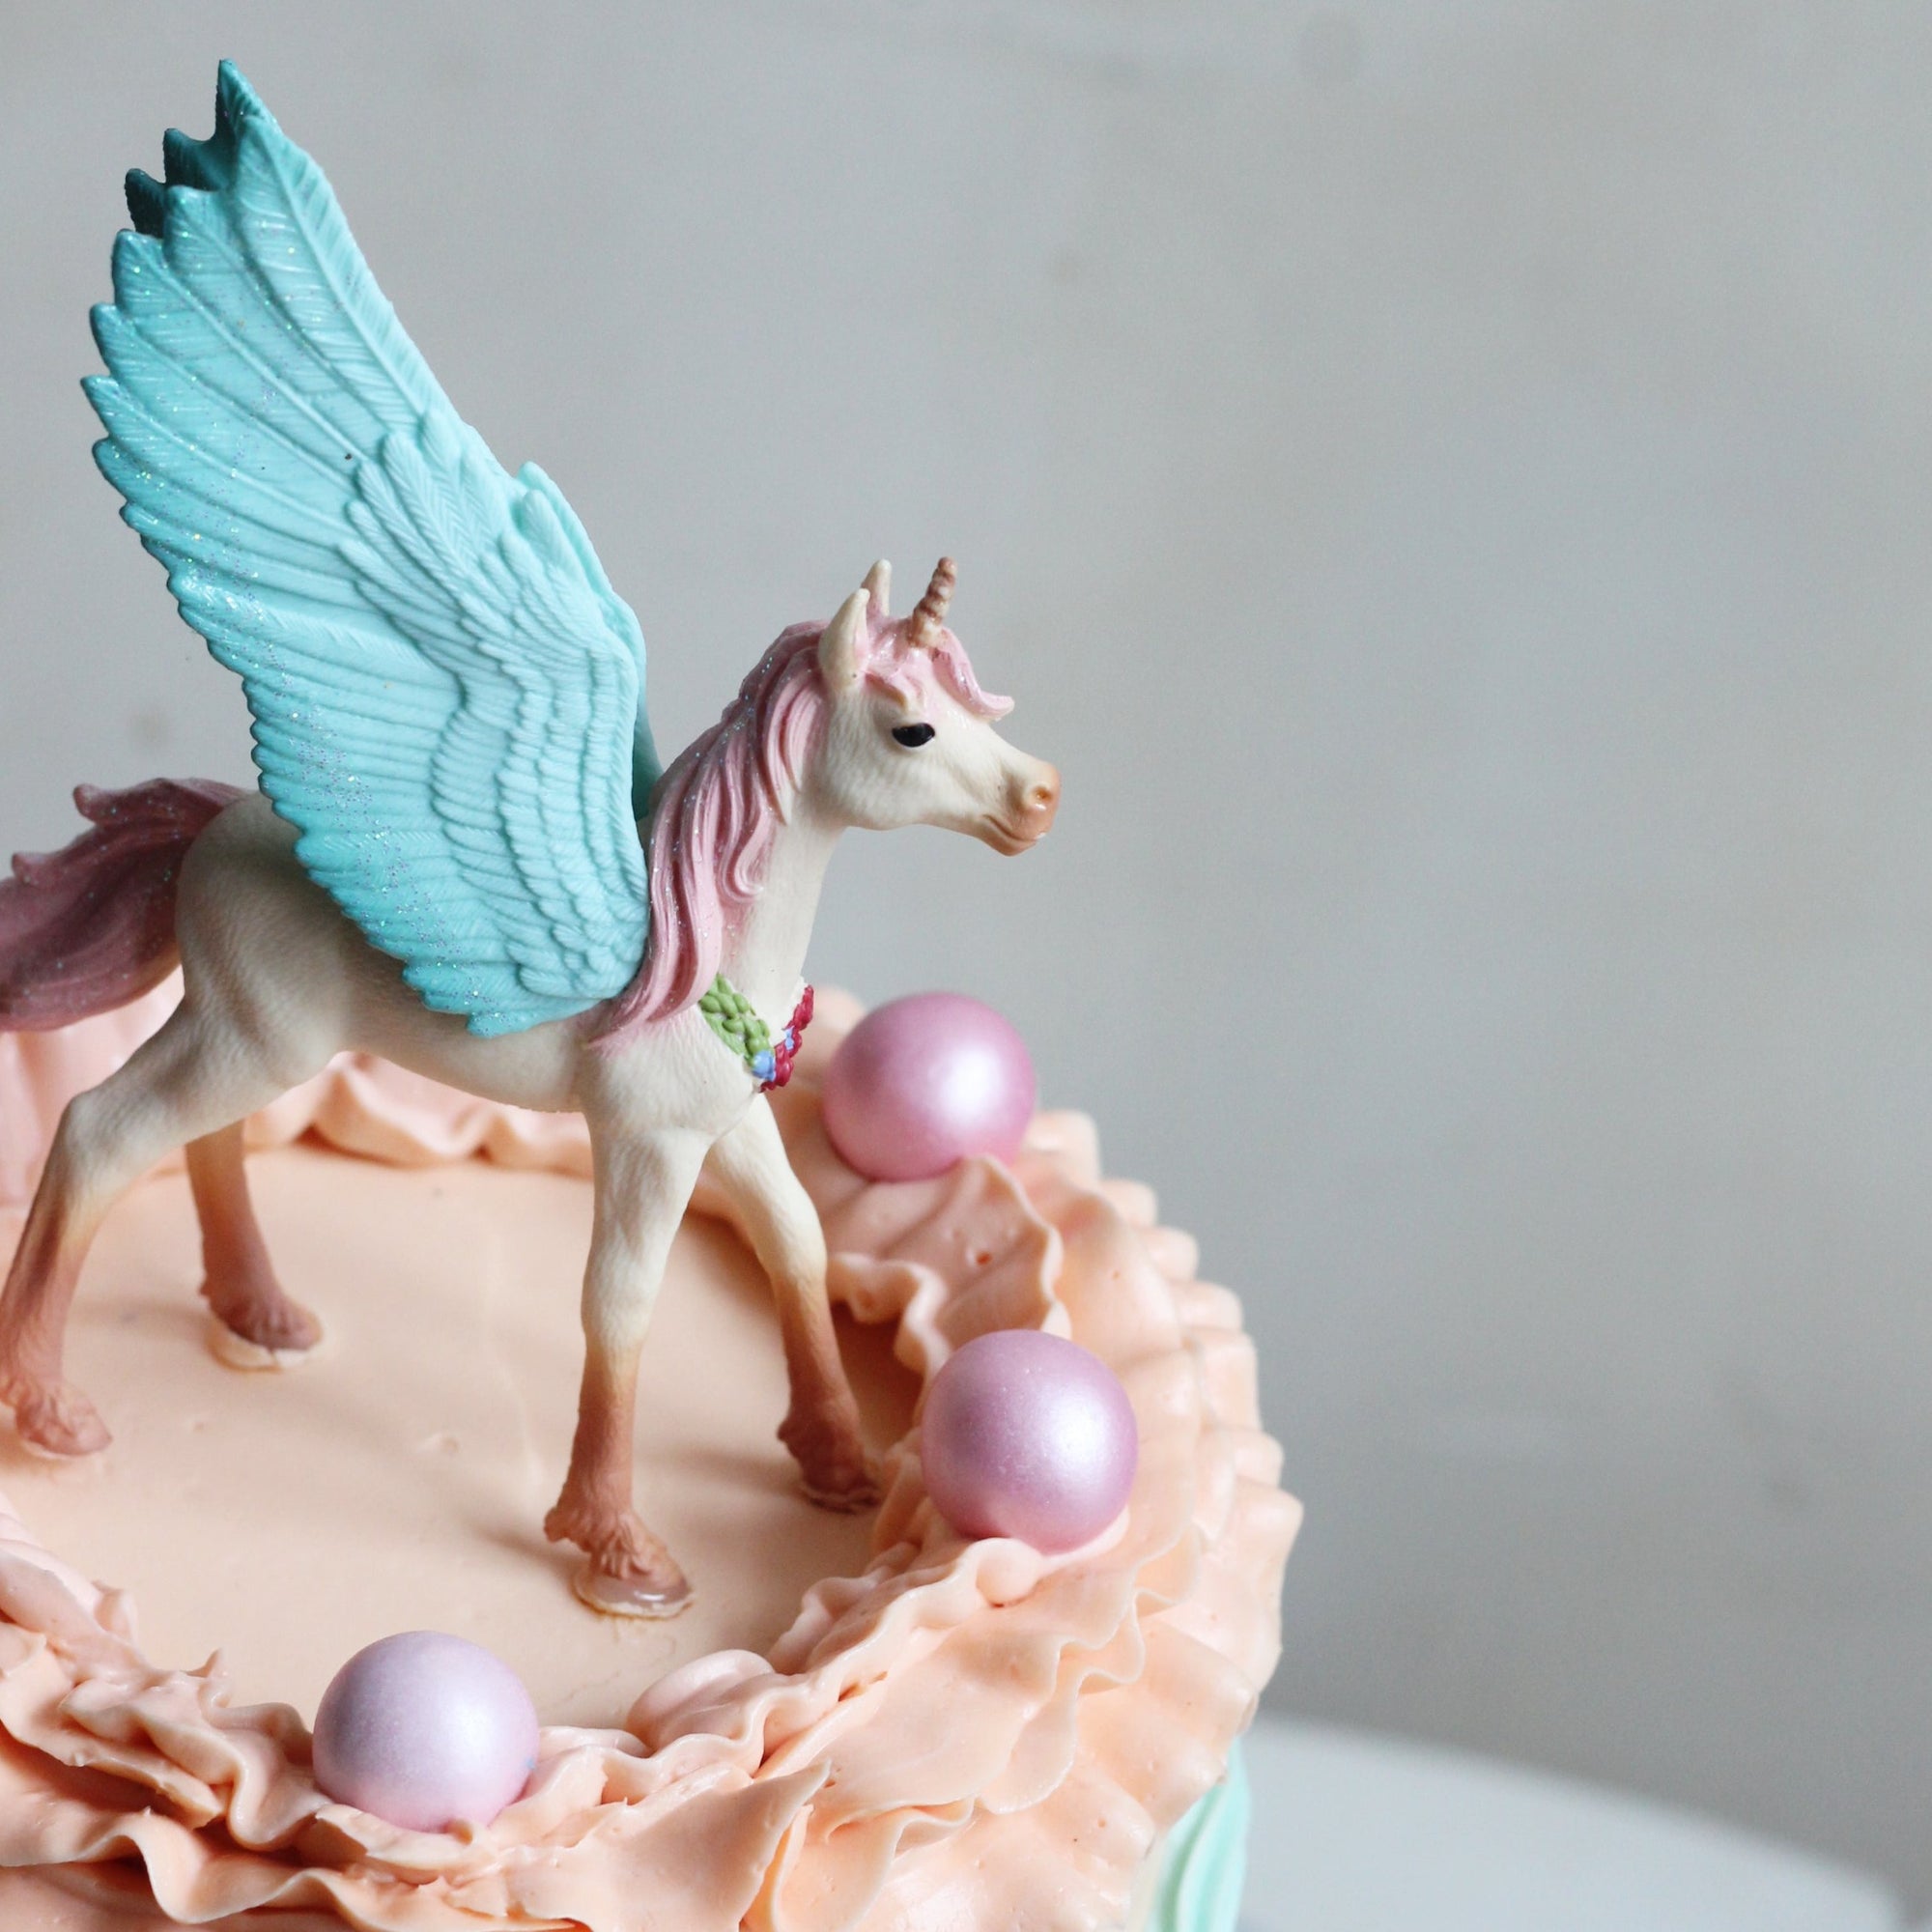 The Greatest Pegacorn Cake That You'll See Today | Foodiggity